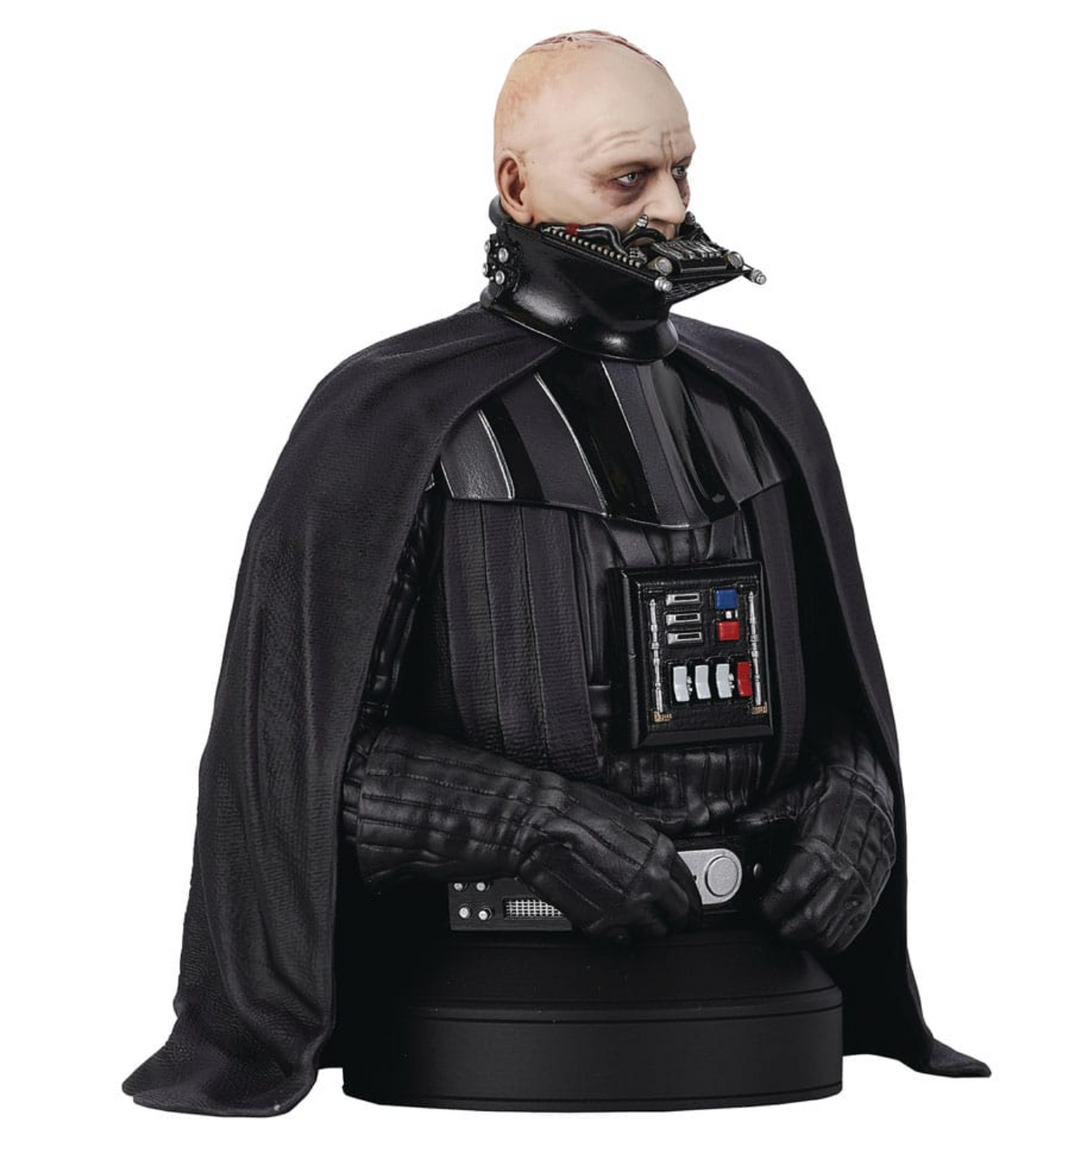 Star Wars Return of the Jedi Darth Vader (Unhelmeted) 1/6 Scale Limited Edition Mini Bust